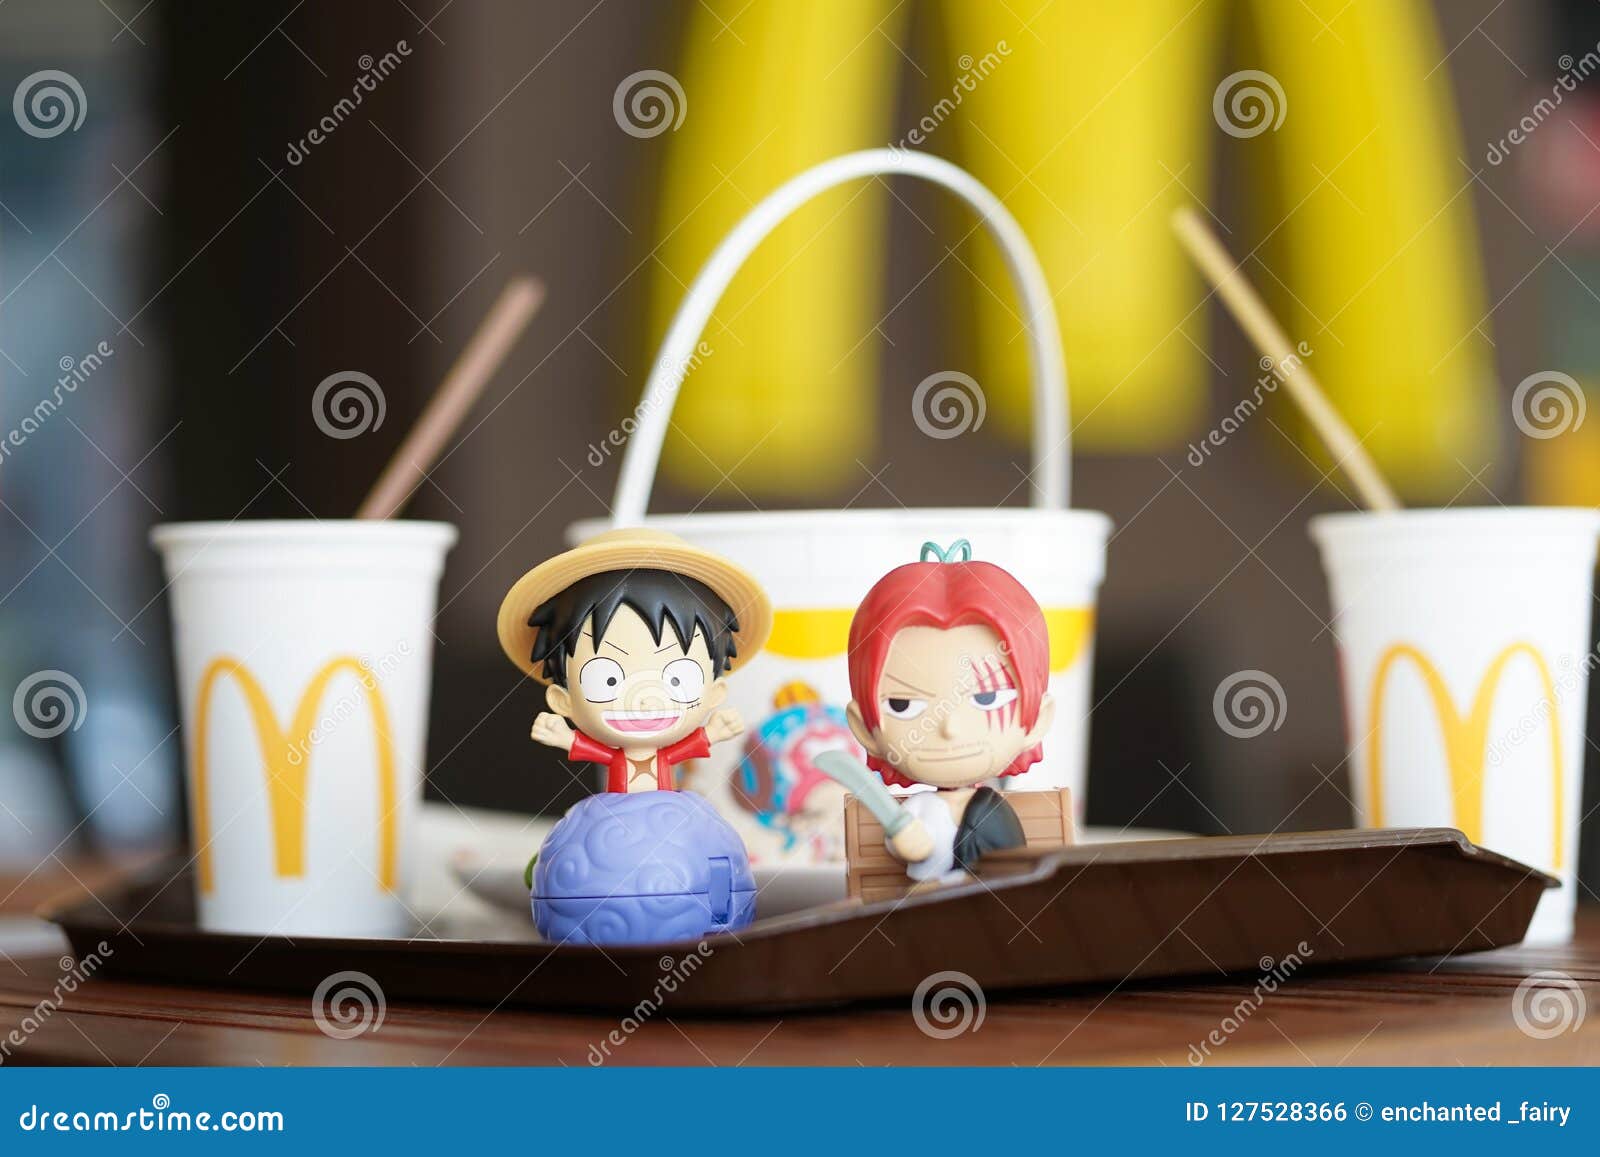 BANGKOK, THAILAND - June 18, 2014 : Moto Moto The Hippo Character Form  Madagascar Animation. There Are Toy Sold As Part Of McDonald's Happy Meal.  Stock Photo, Picture and Royalty Free Image. Image 29590236.